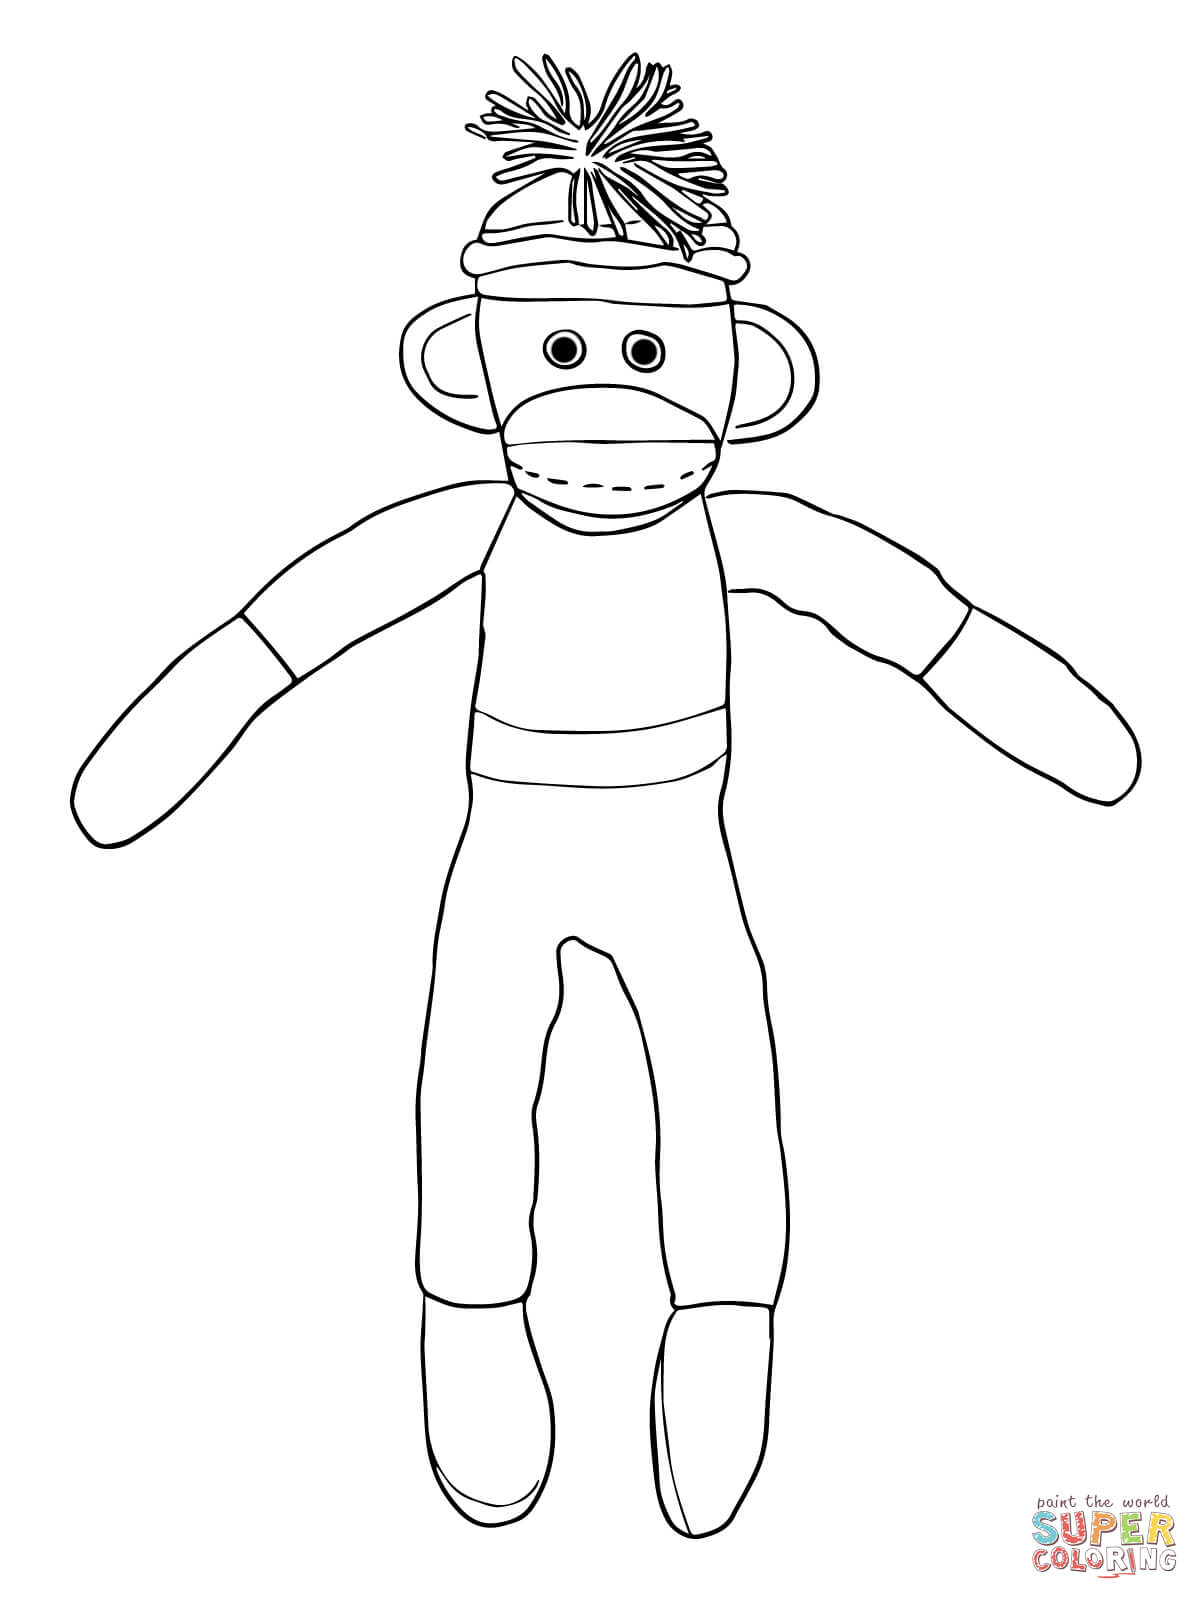 Christmas Sock Monkey coloring page